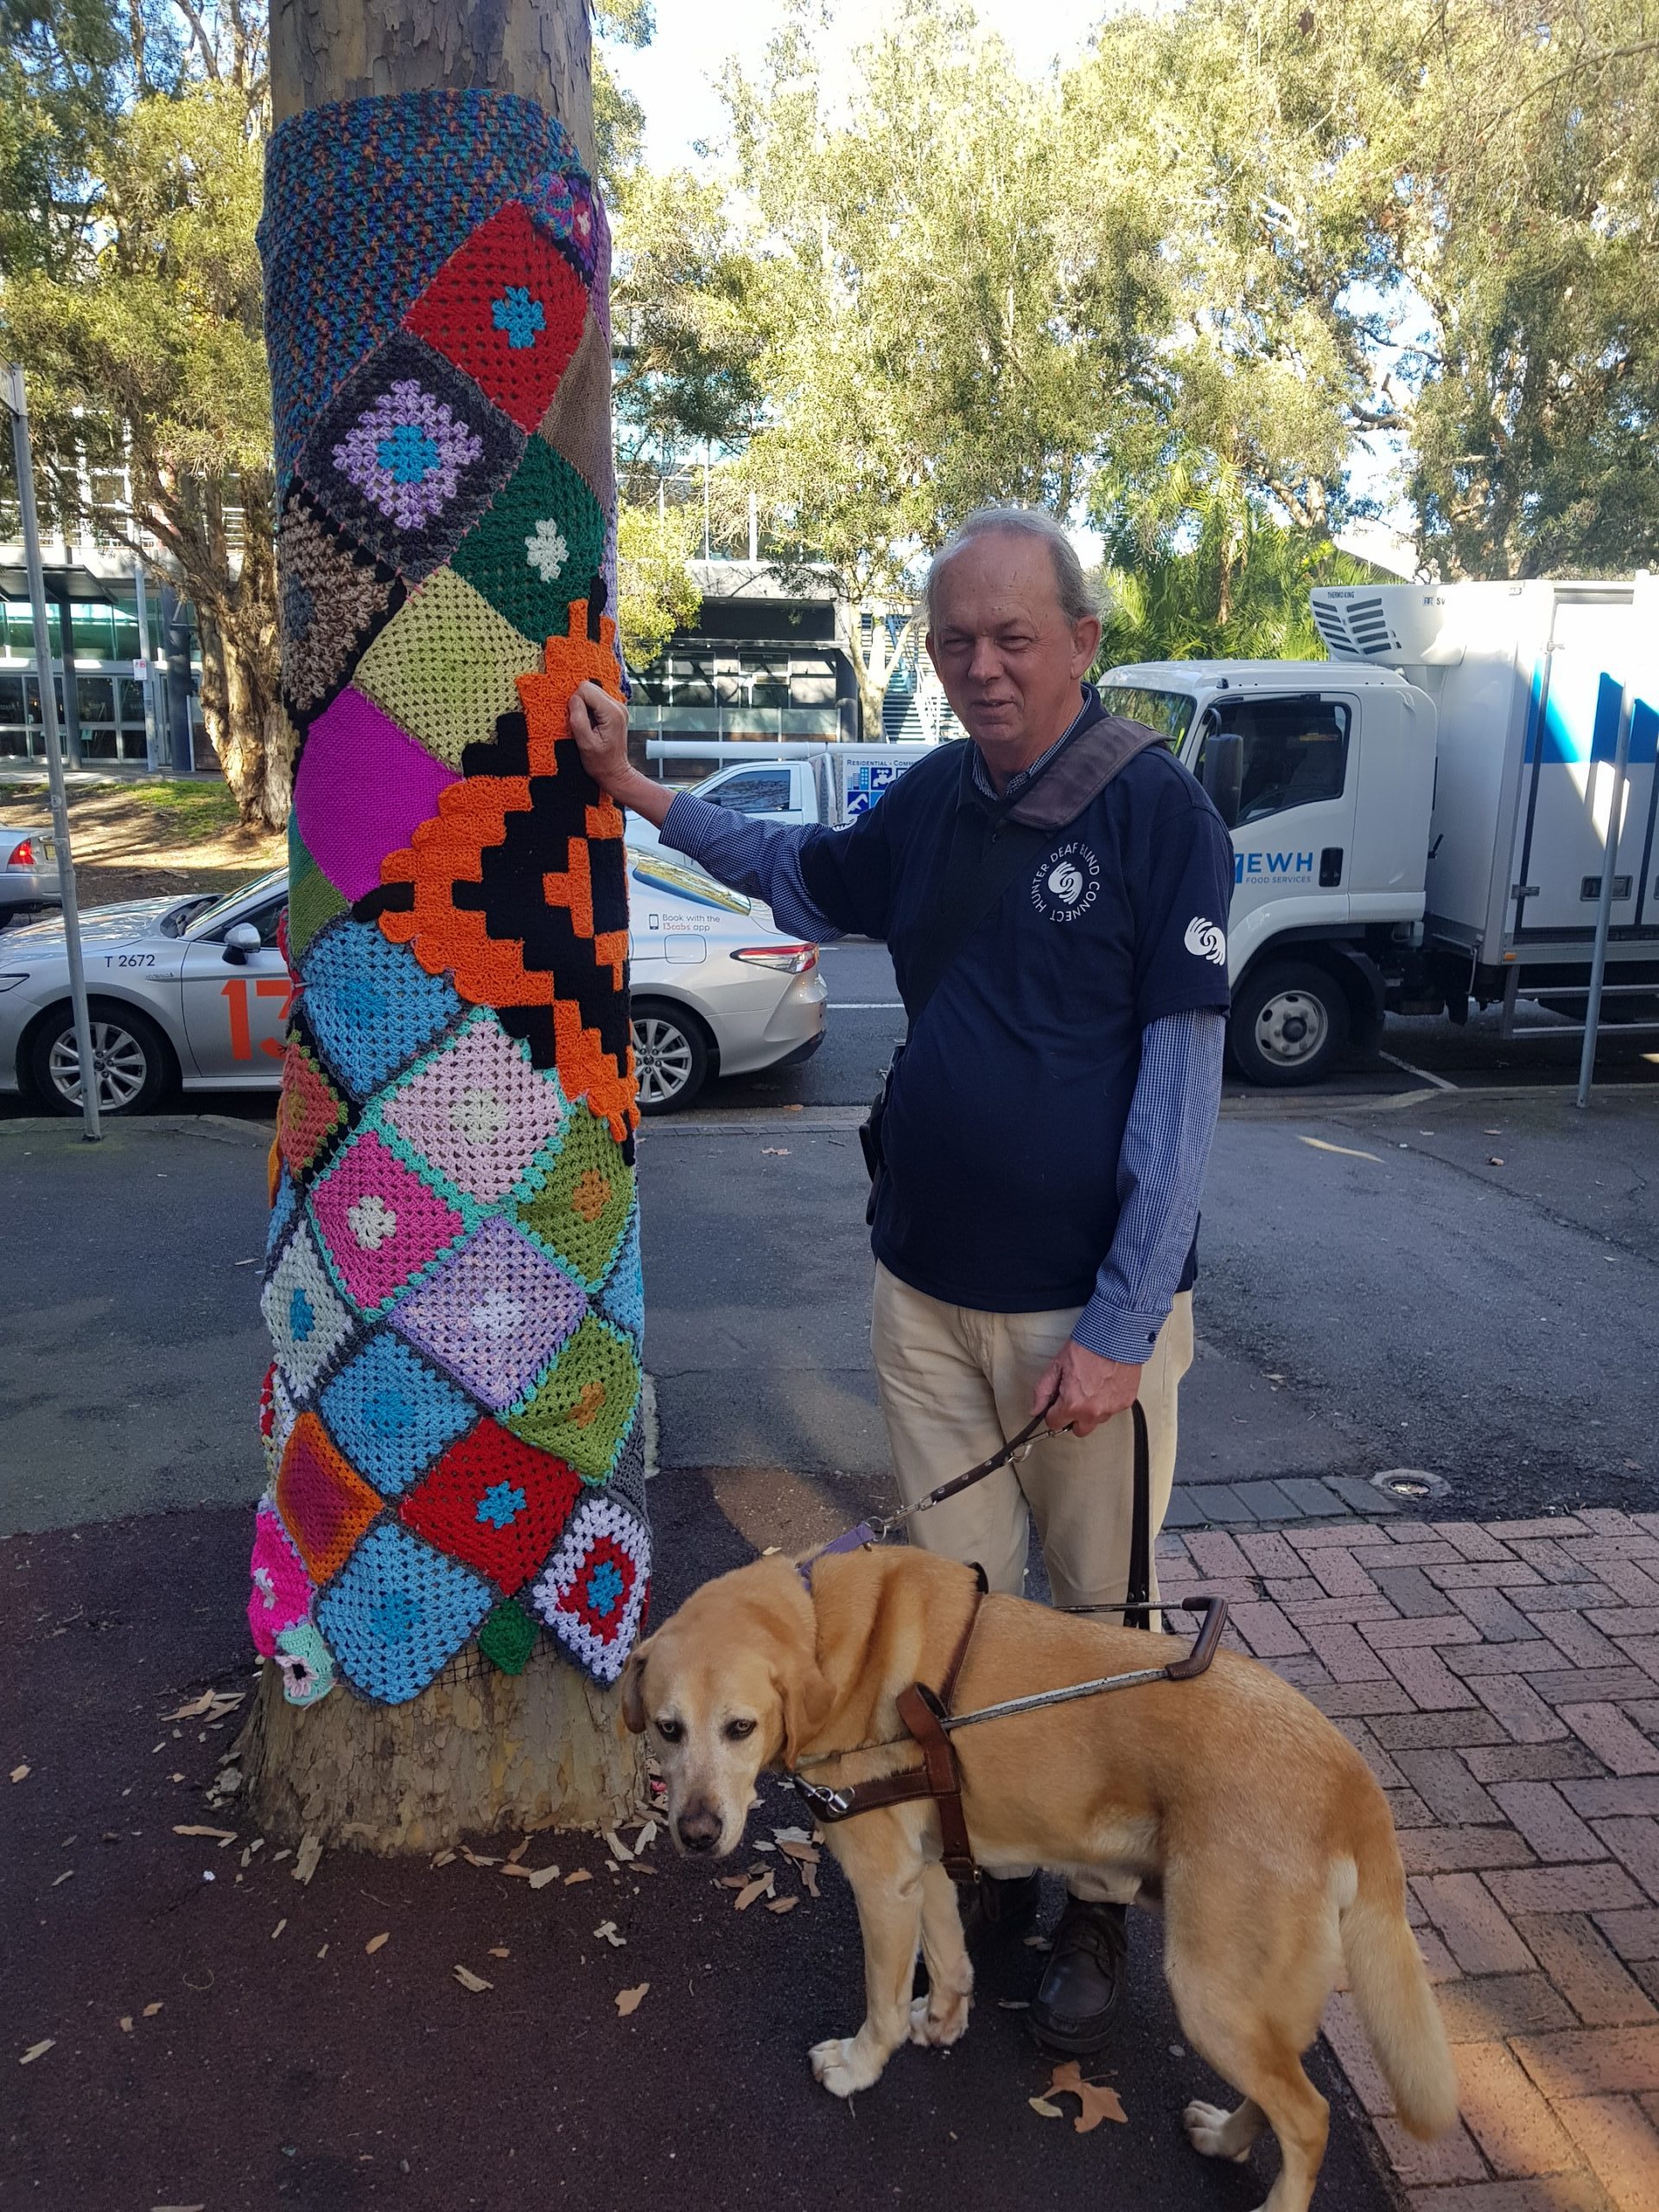 Stephen standing next to tree that has been covered in colourful pieces of knitted wool. Next to Stephen his guide dog